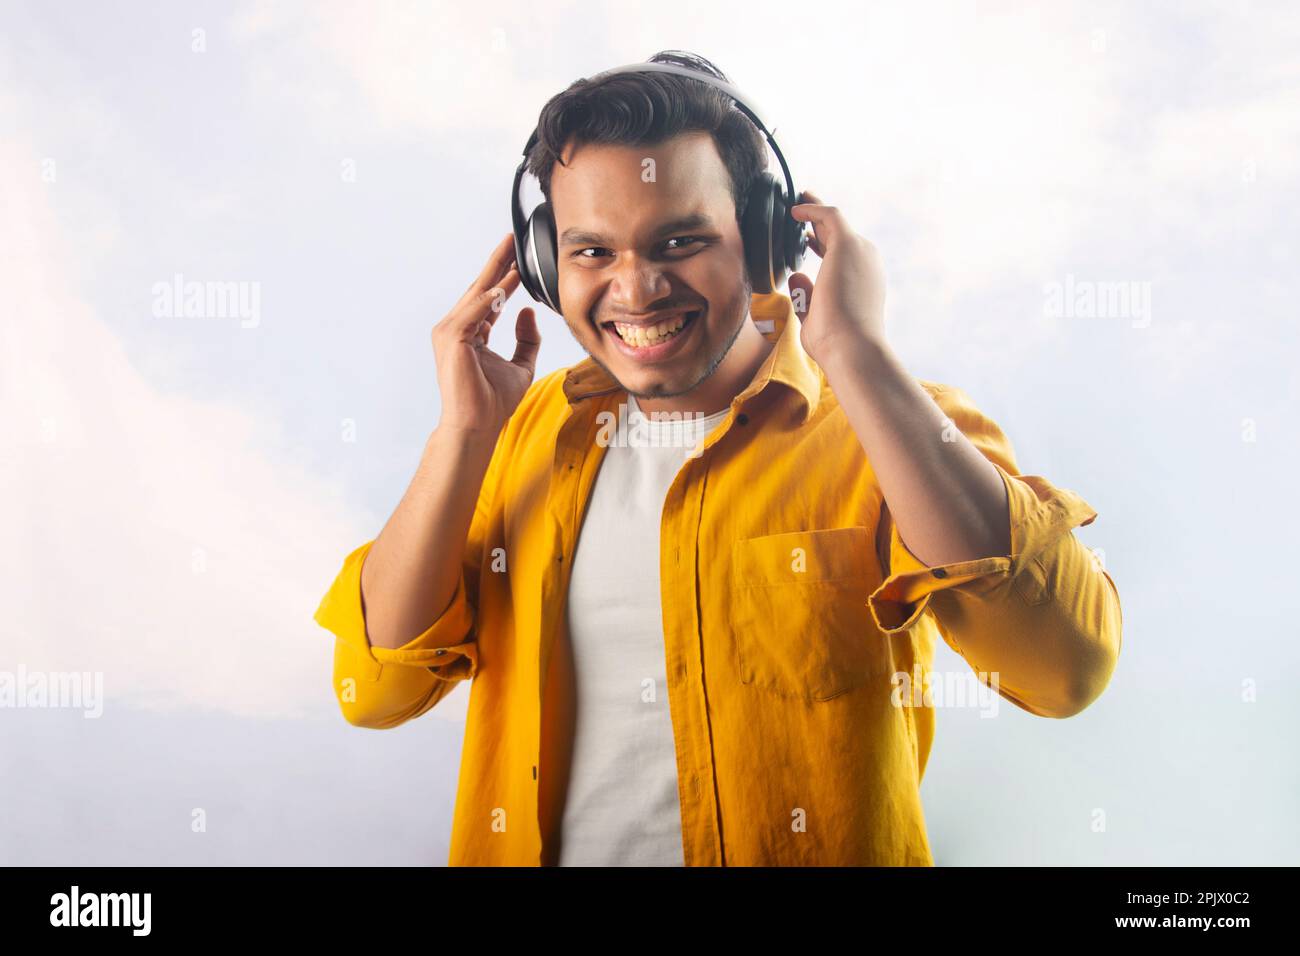 Portrait of a happy young man listening music on headphones Stock Photo